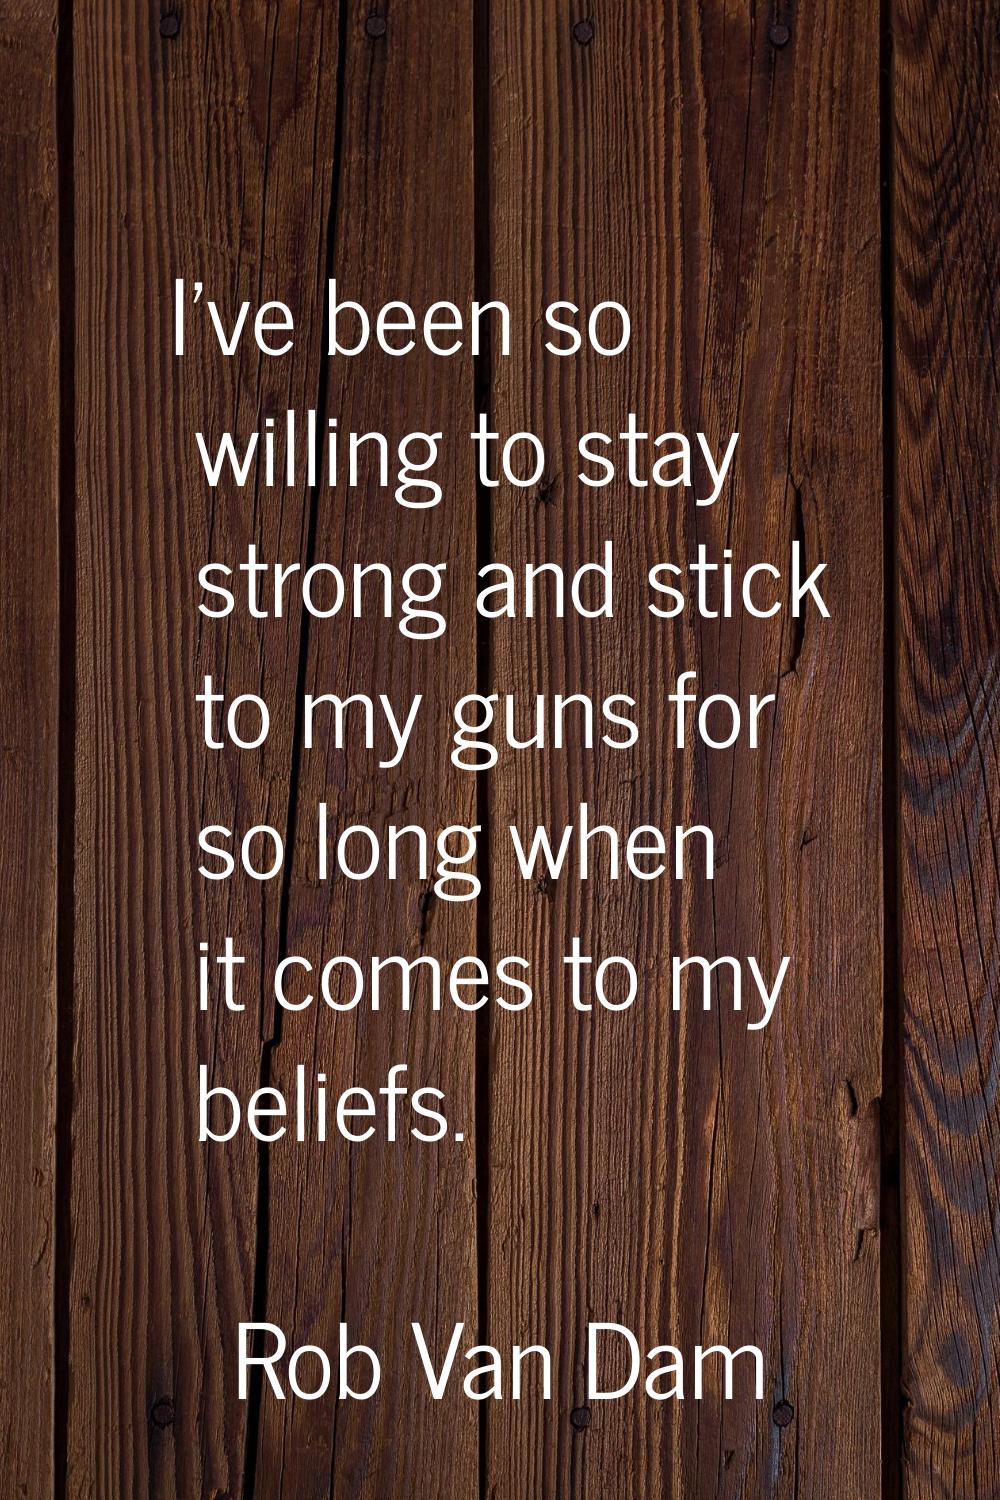 I've been so willing to stay strong and stick to my guns for so long when it comes to my beliefs.